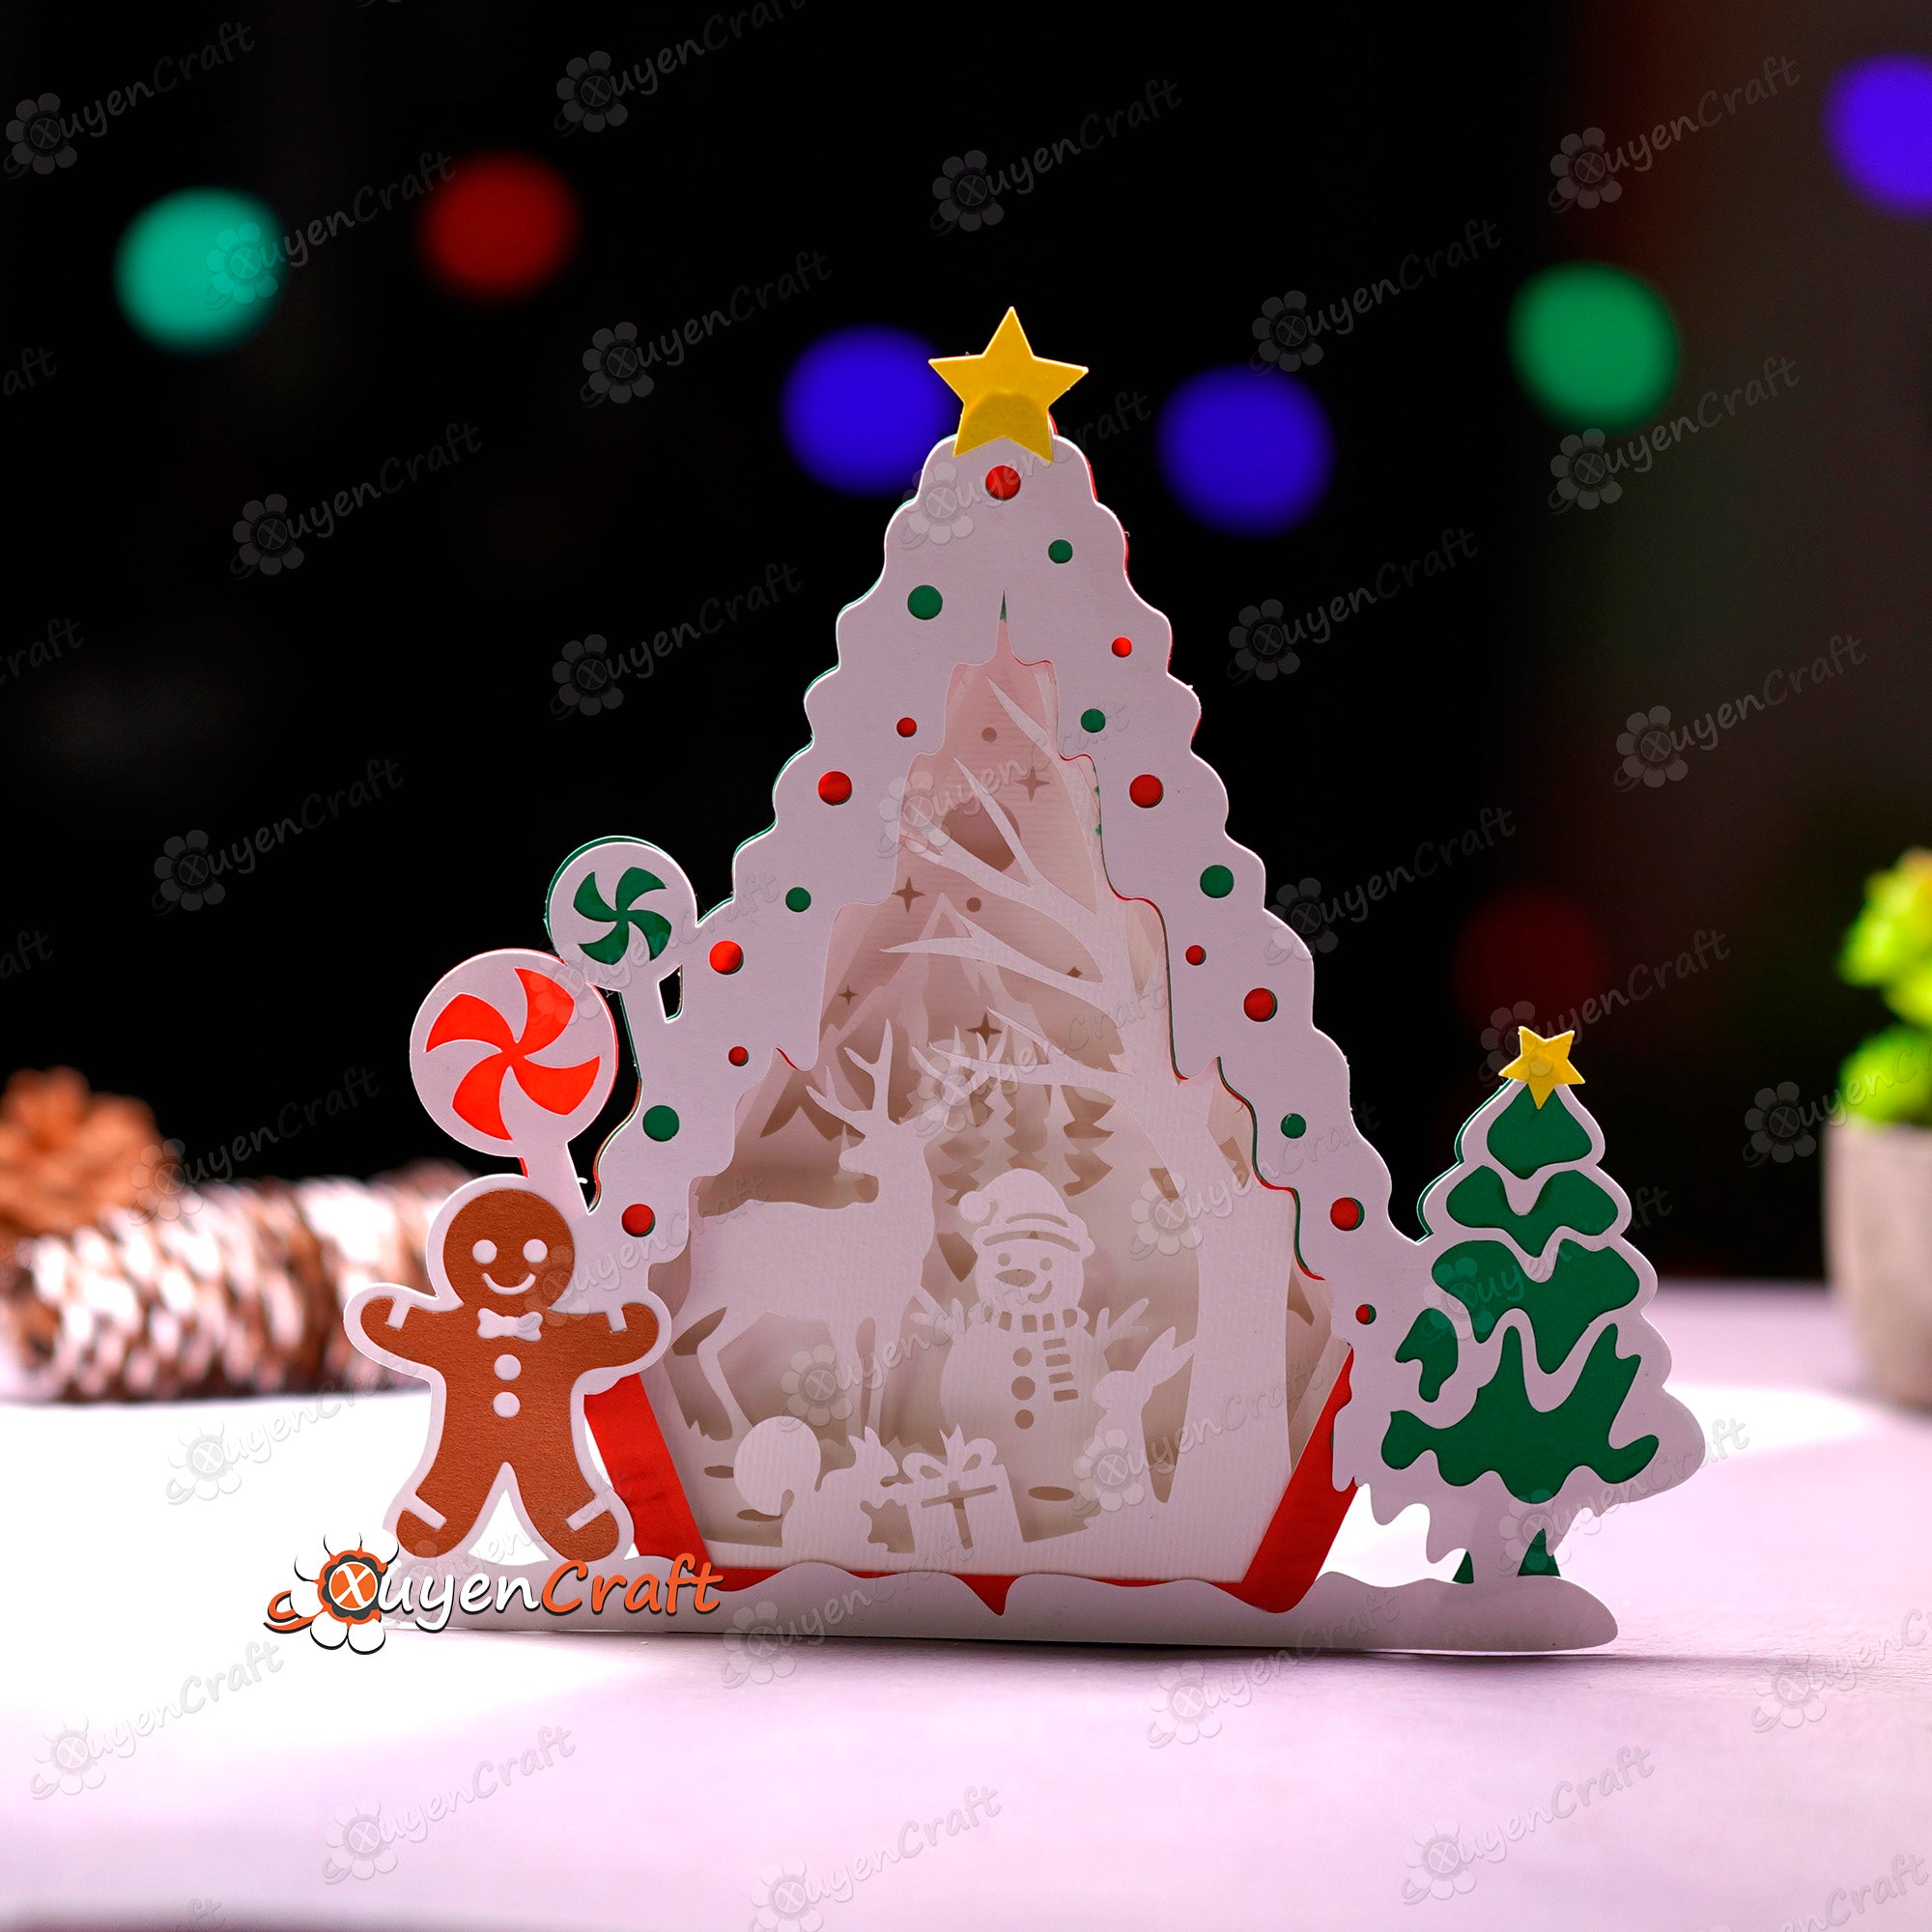 Snowman in Gingerbread House Shadow Box SVG Light Box - Candy House Christmas Lantern - Paper Cut Template For Christmas - Snowman House Svg